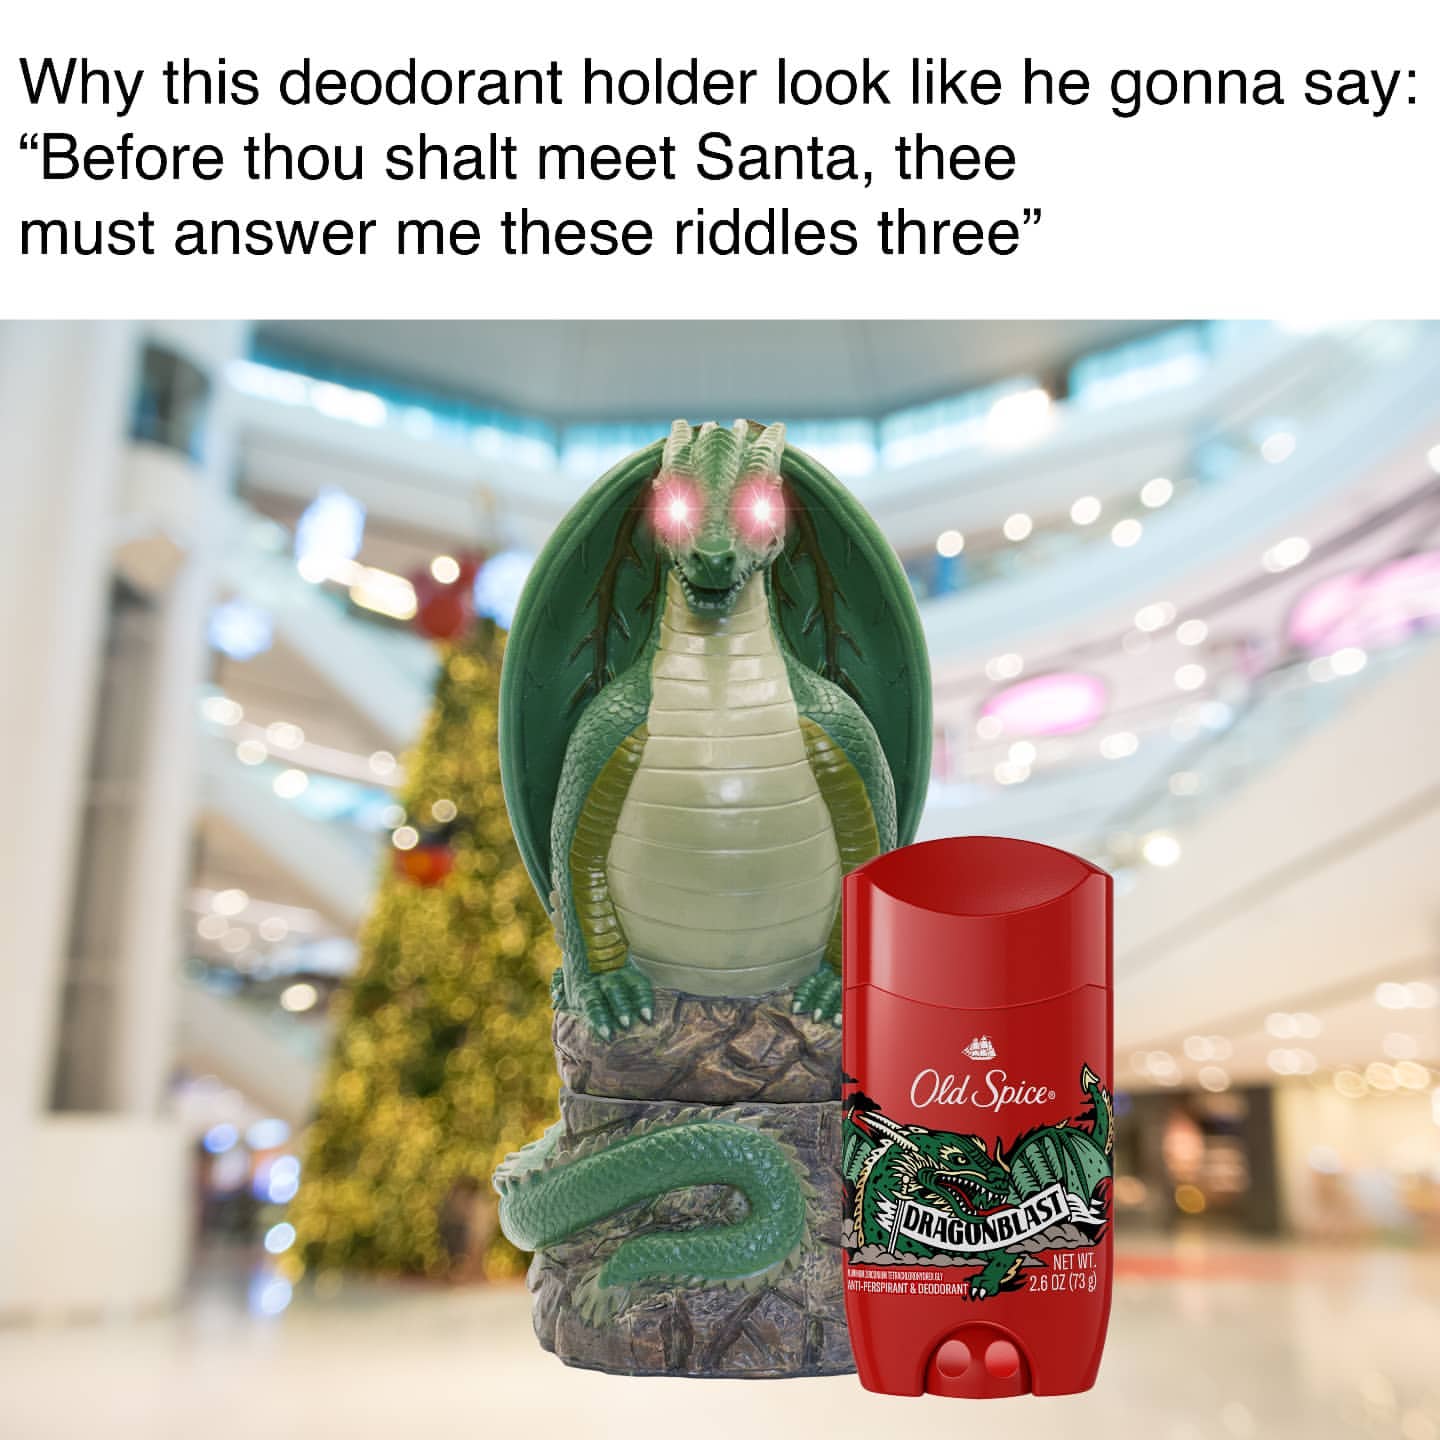 Why this deodorant holder look like he gonna say: "Before thou shalt meet Santa, thee must answer me these riddles three".